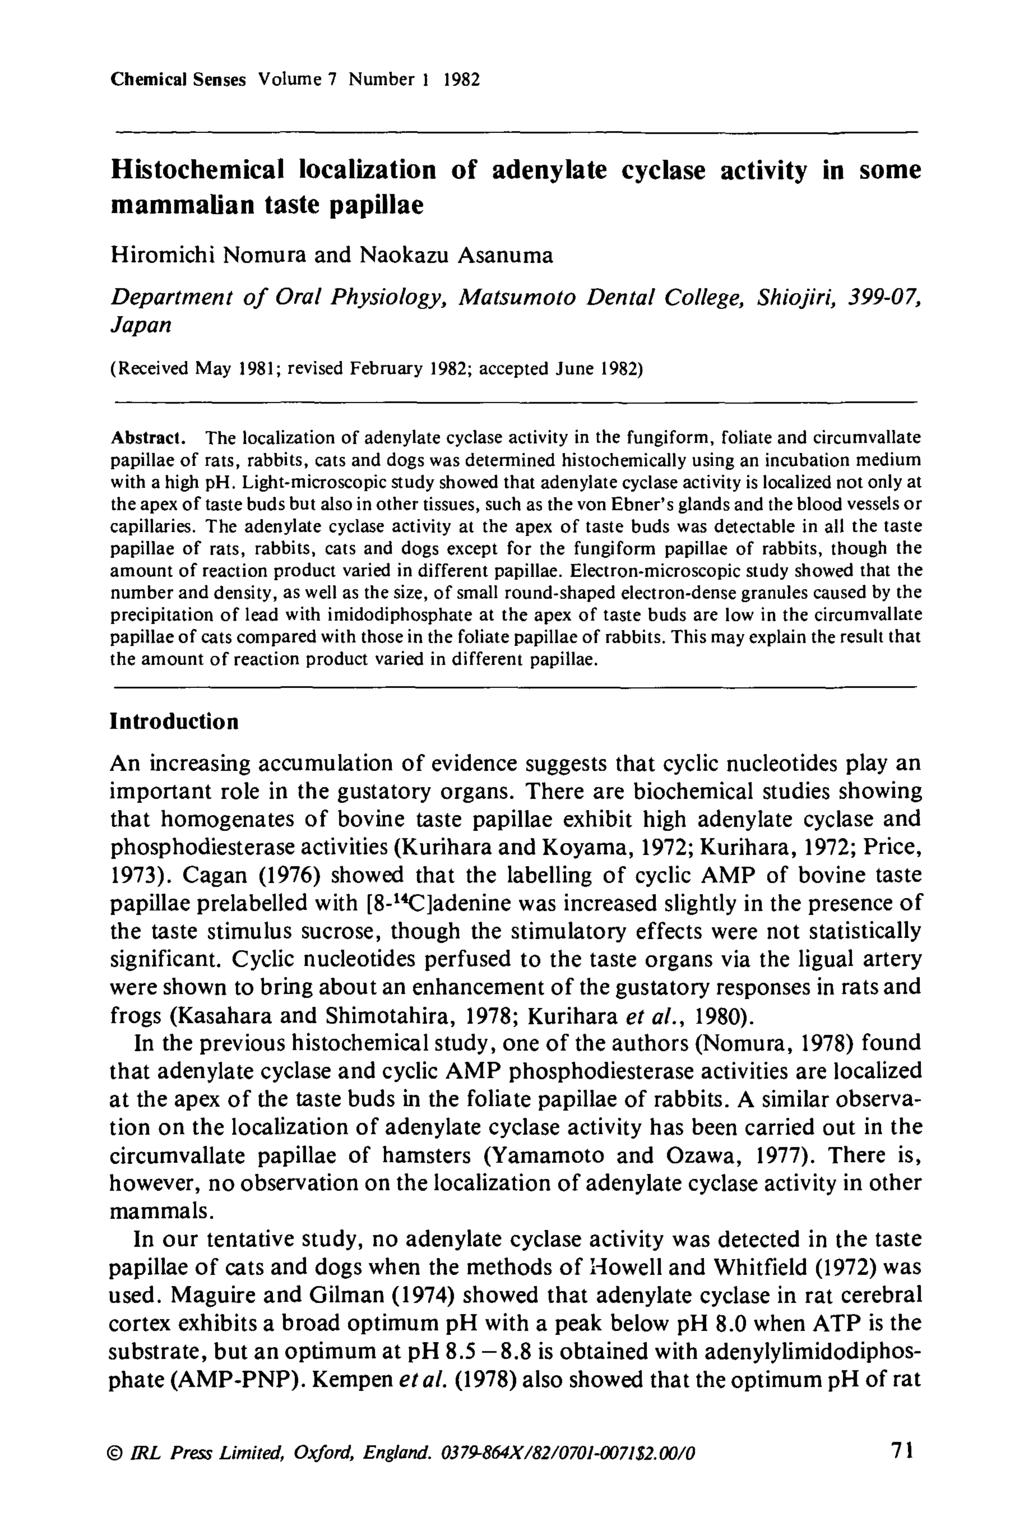 Chemical Senses Volume 7 Number 1 1982 Histochemical localization of adenylate cyclase activity in some mammalian taste papillae Hiromichi Nomura and Naokazu Asanuma Department of Oral Physiology,